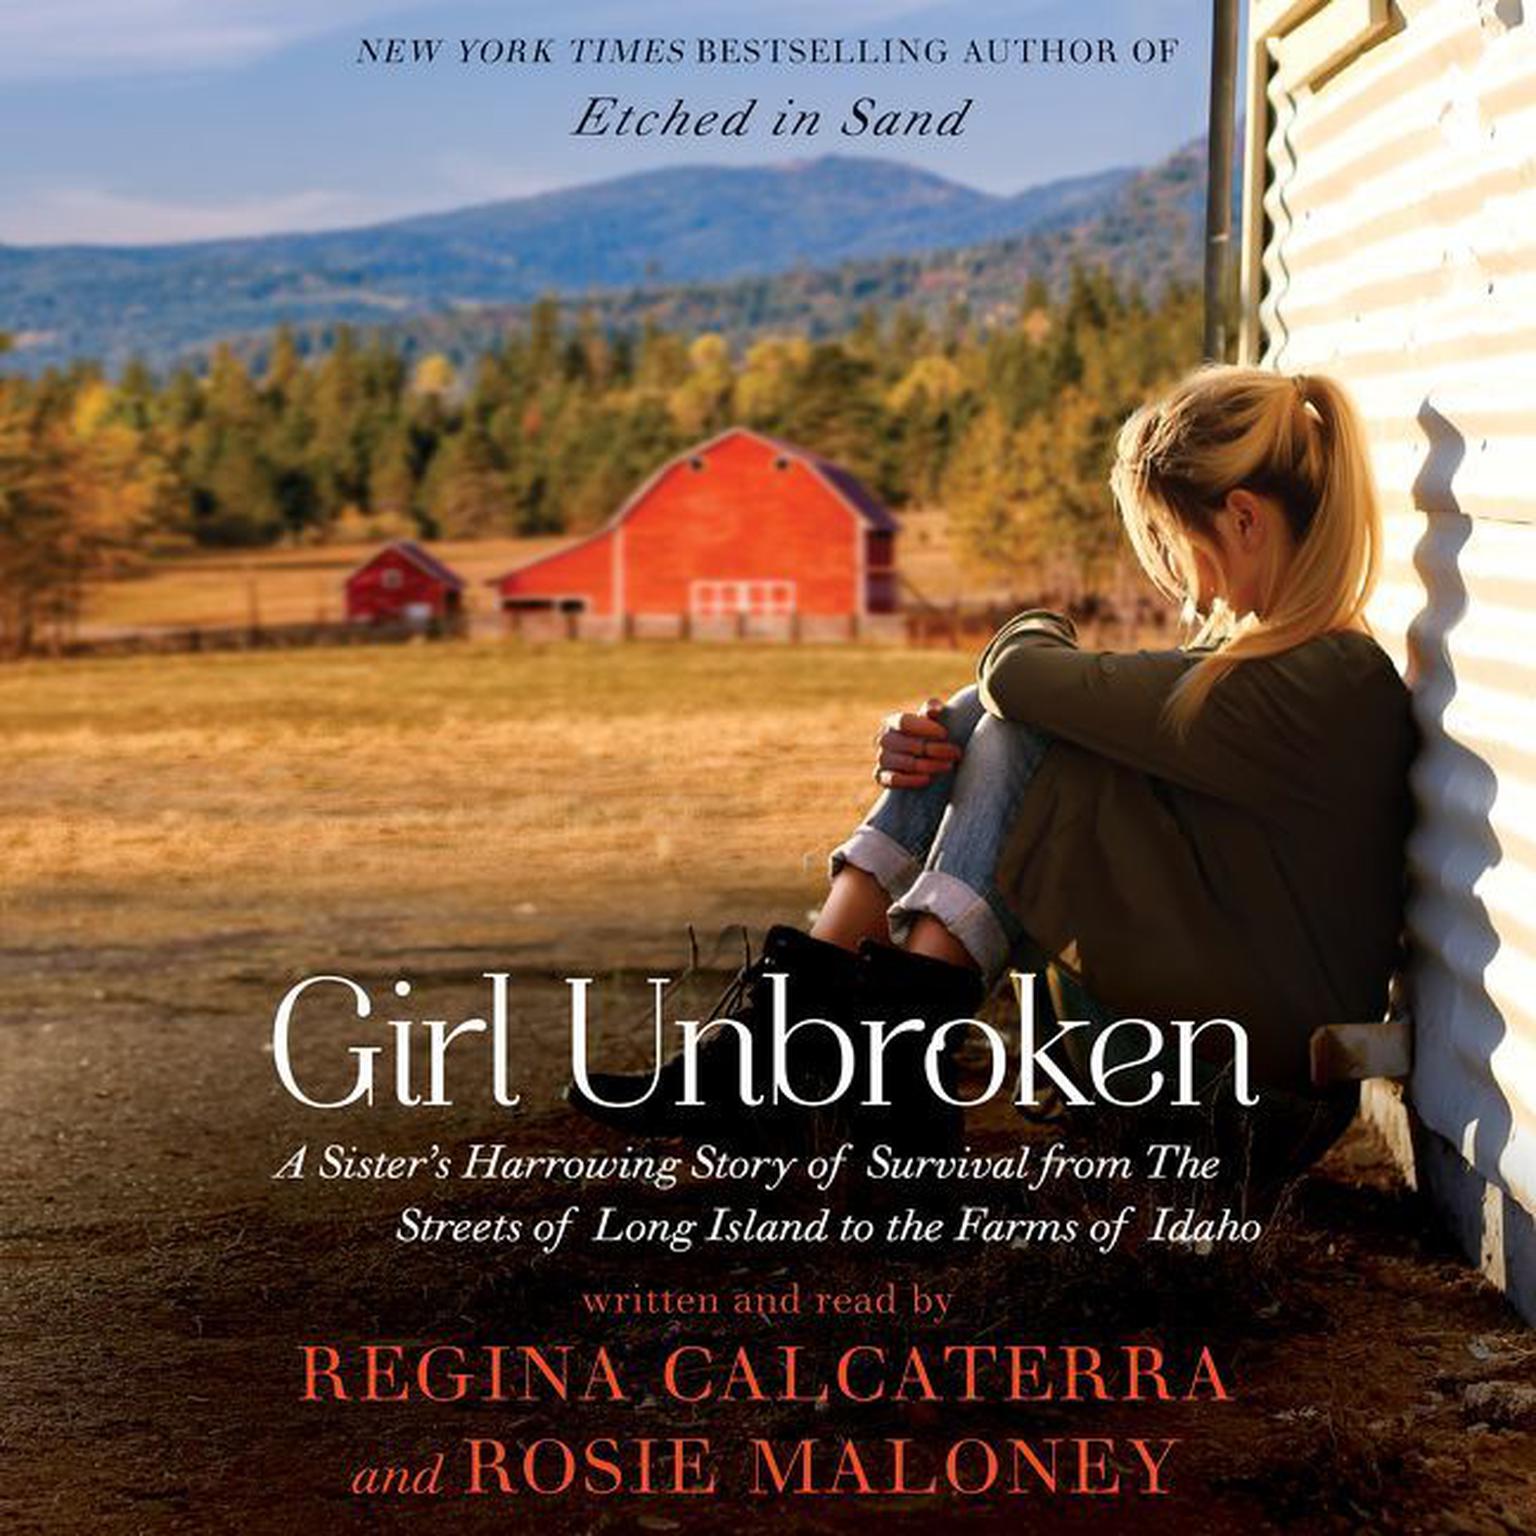 Girl Unbroken: A Sisters Harrowing Story of Survival from The Streets of Long Island to the Farms of Idaho Audiobook, by Regina Calcaterra